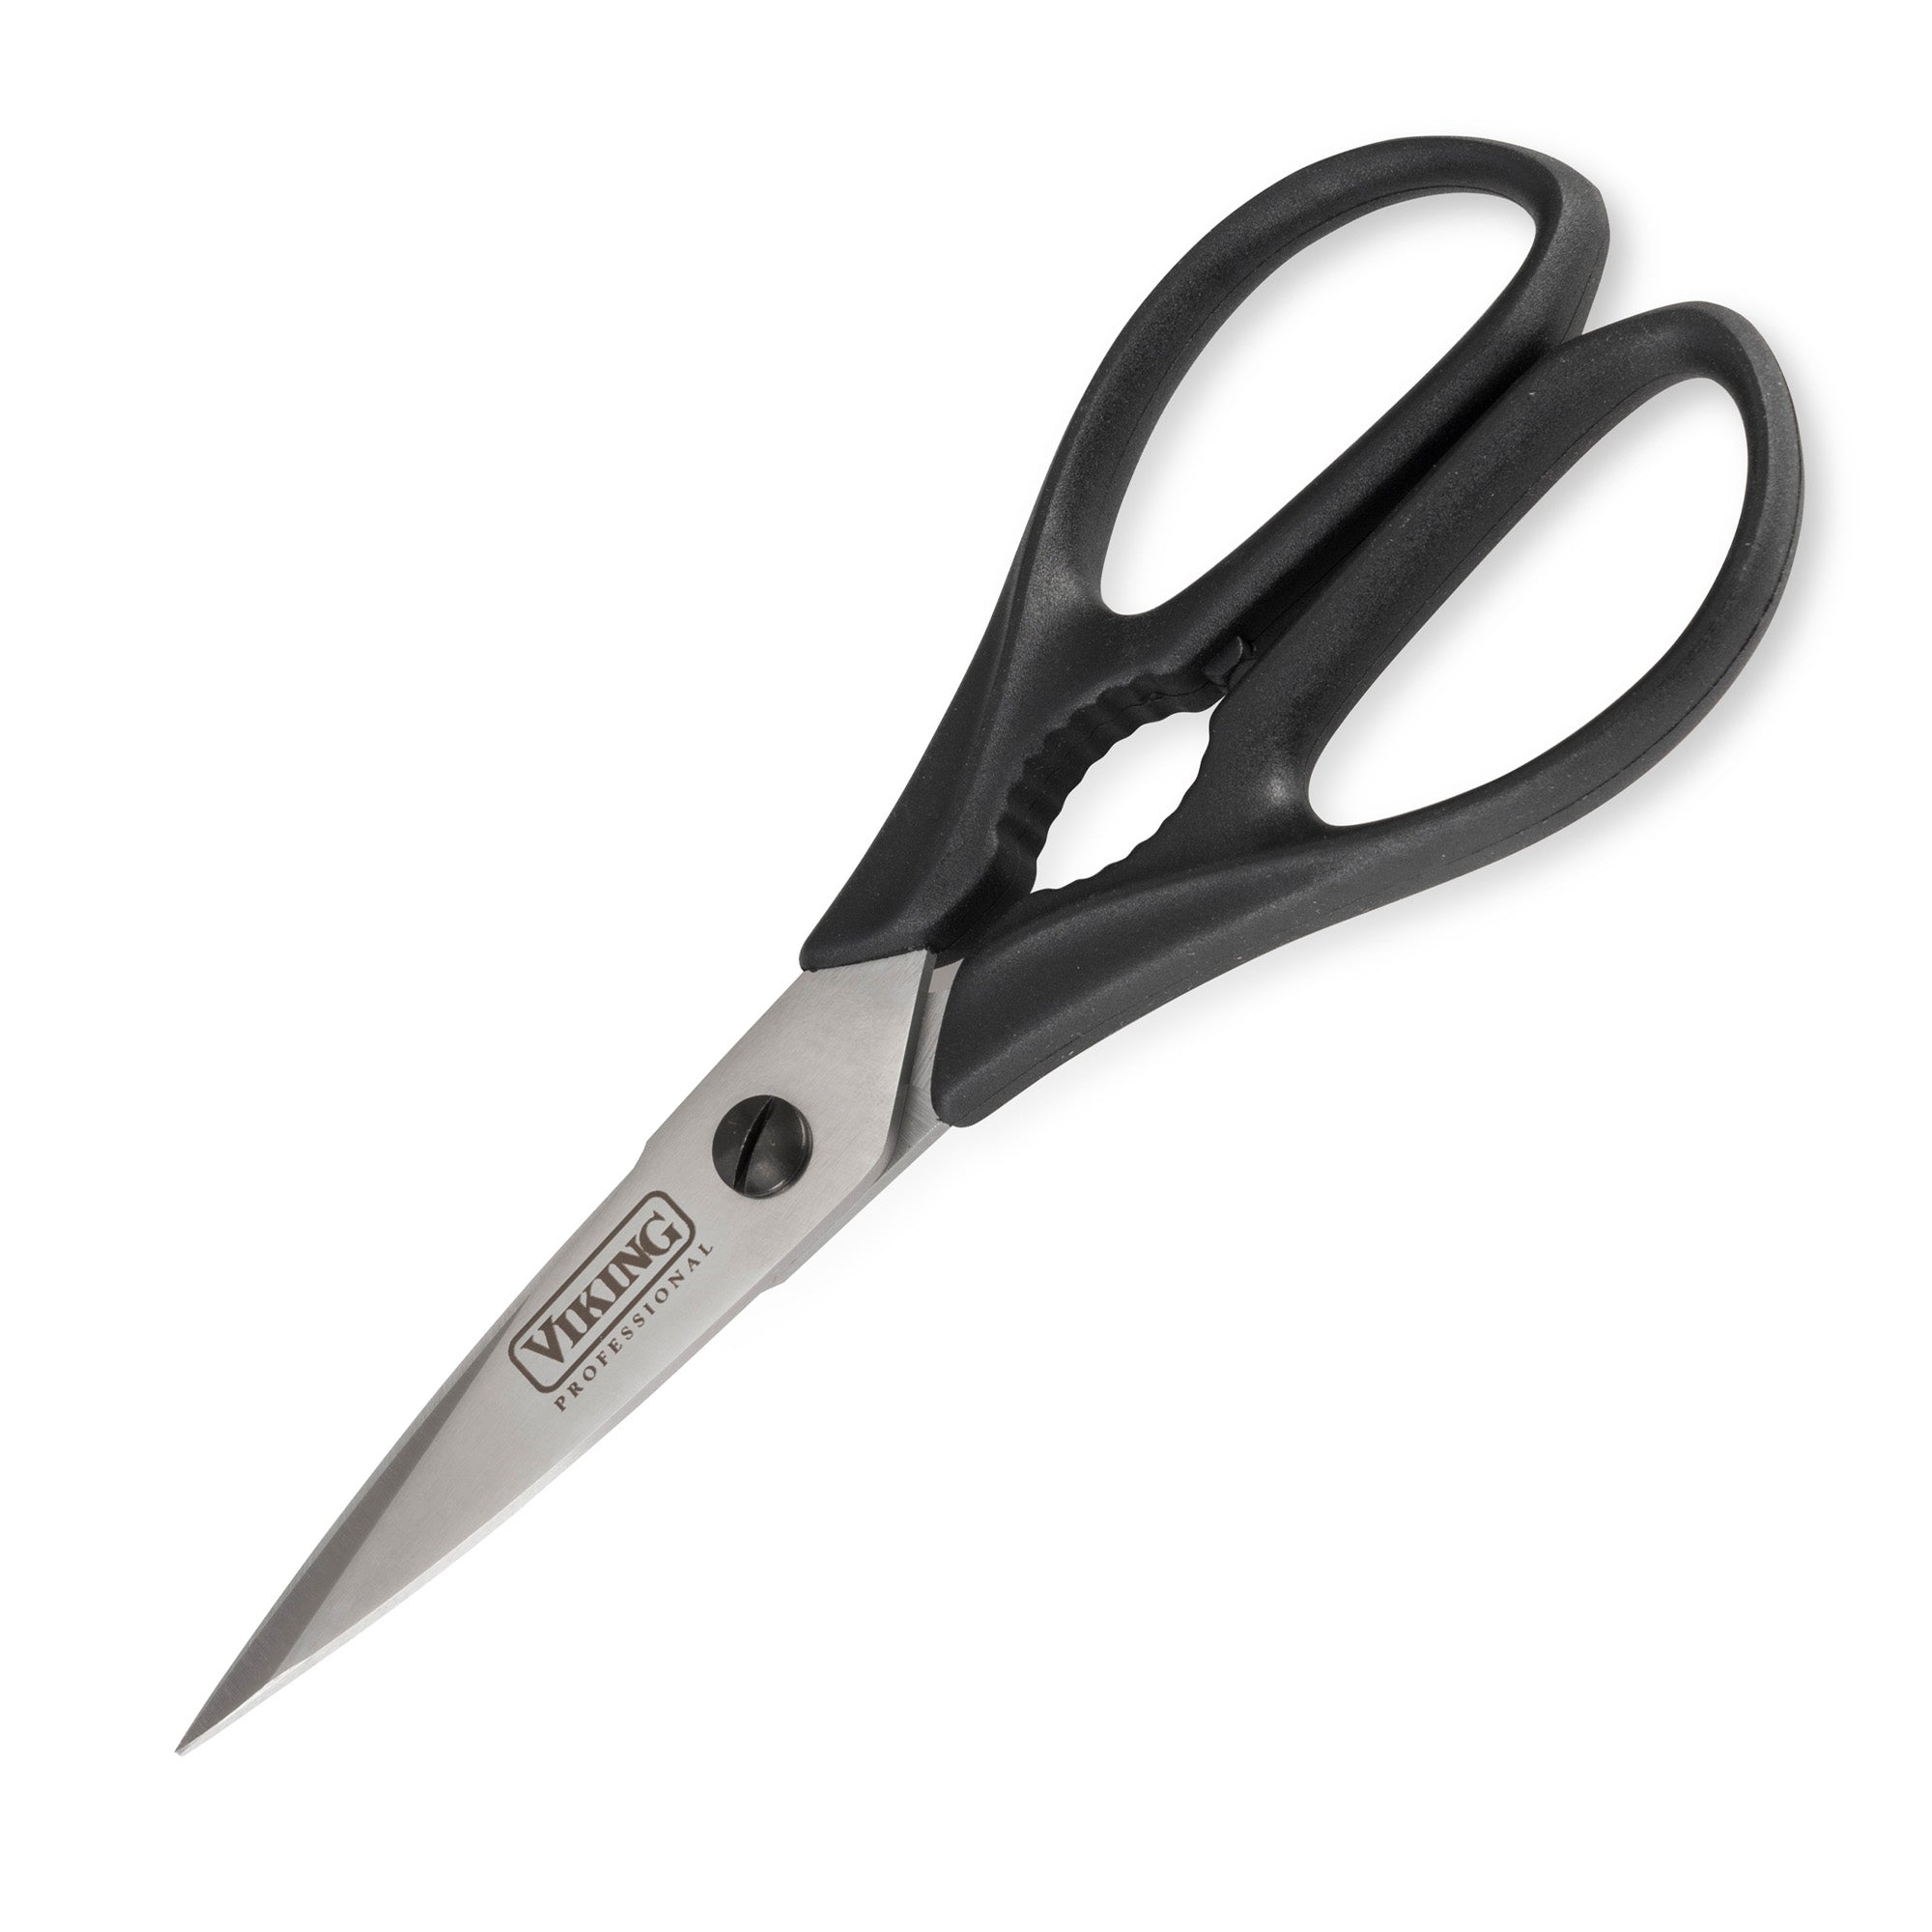 Viking Professional 8-Inch Scissors – Viking Culinary Products